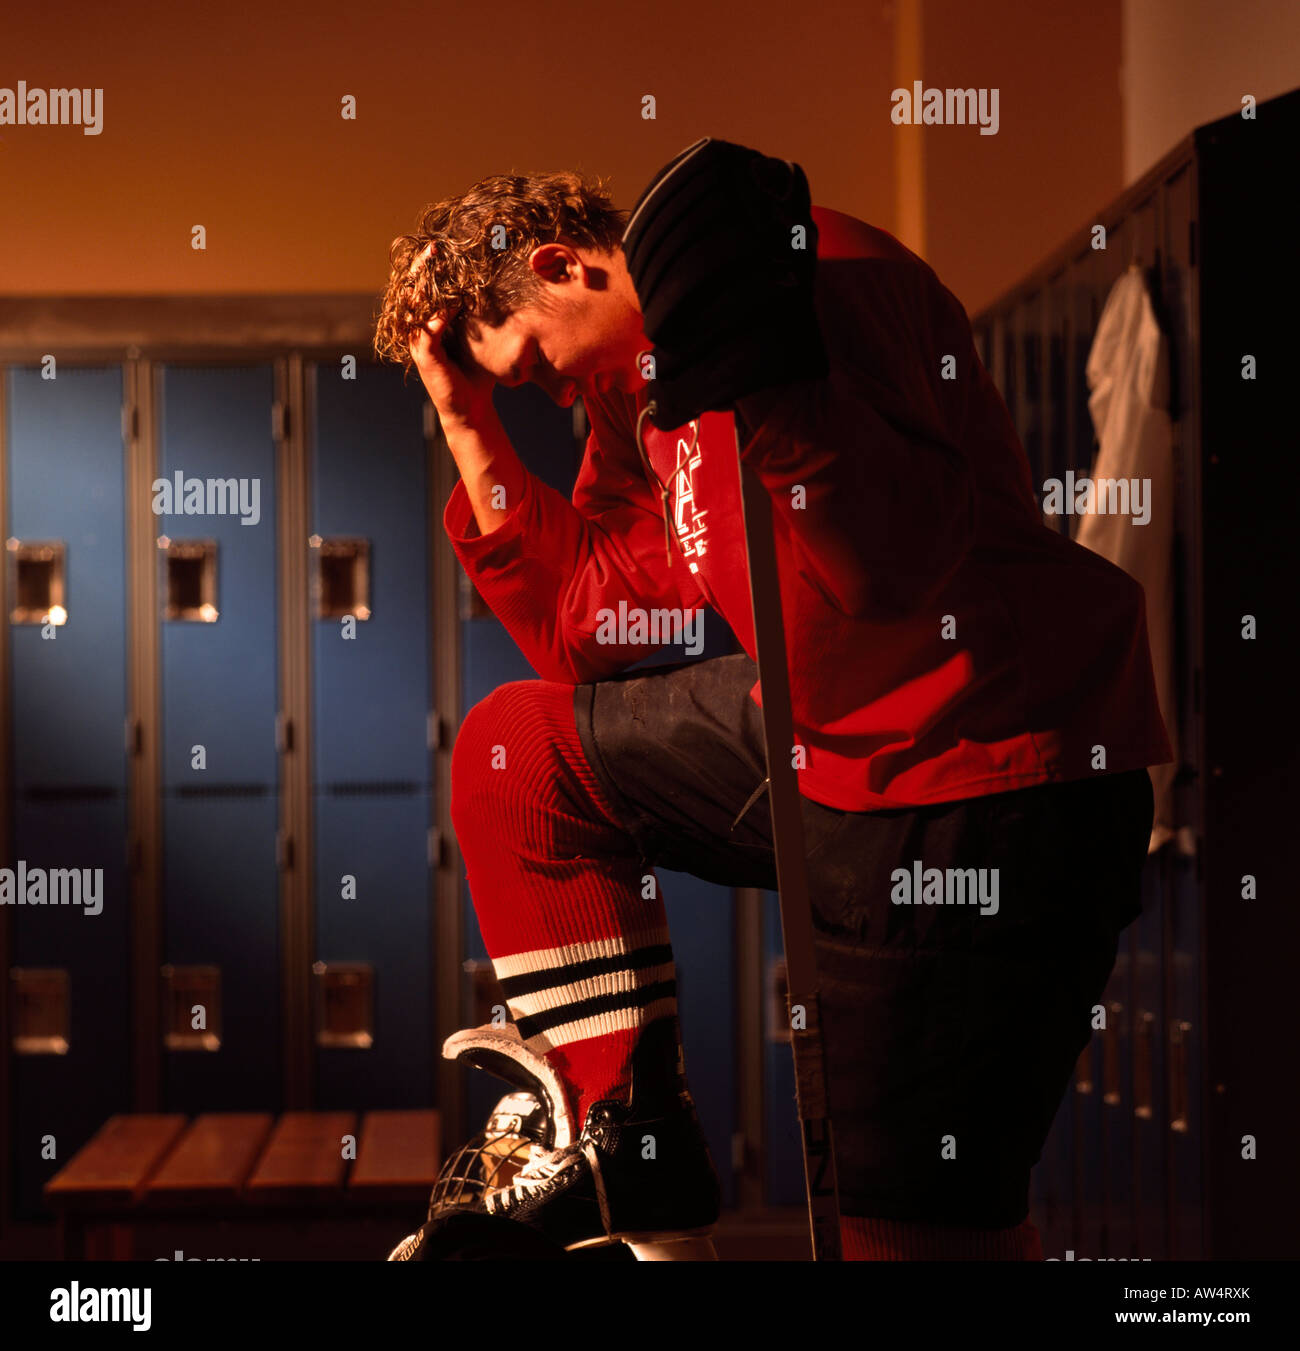 Hockey player in dressing room Stock Photo